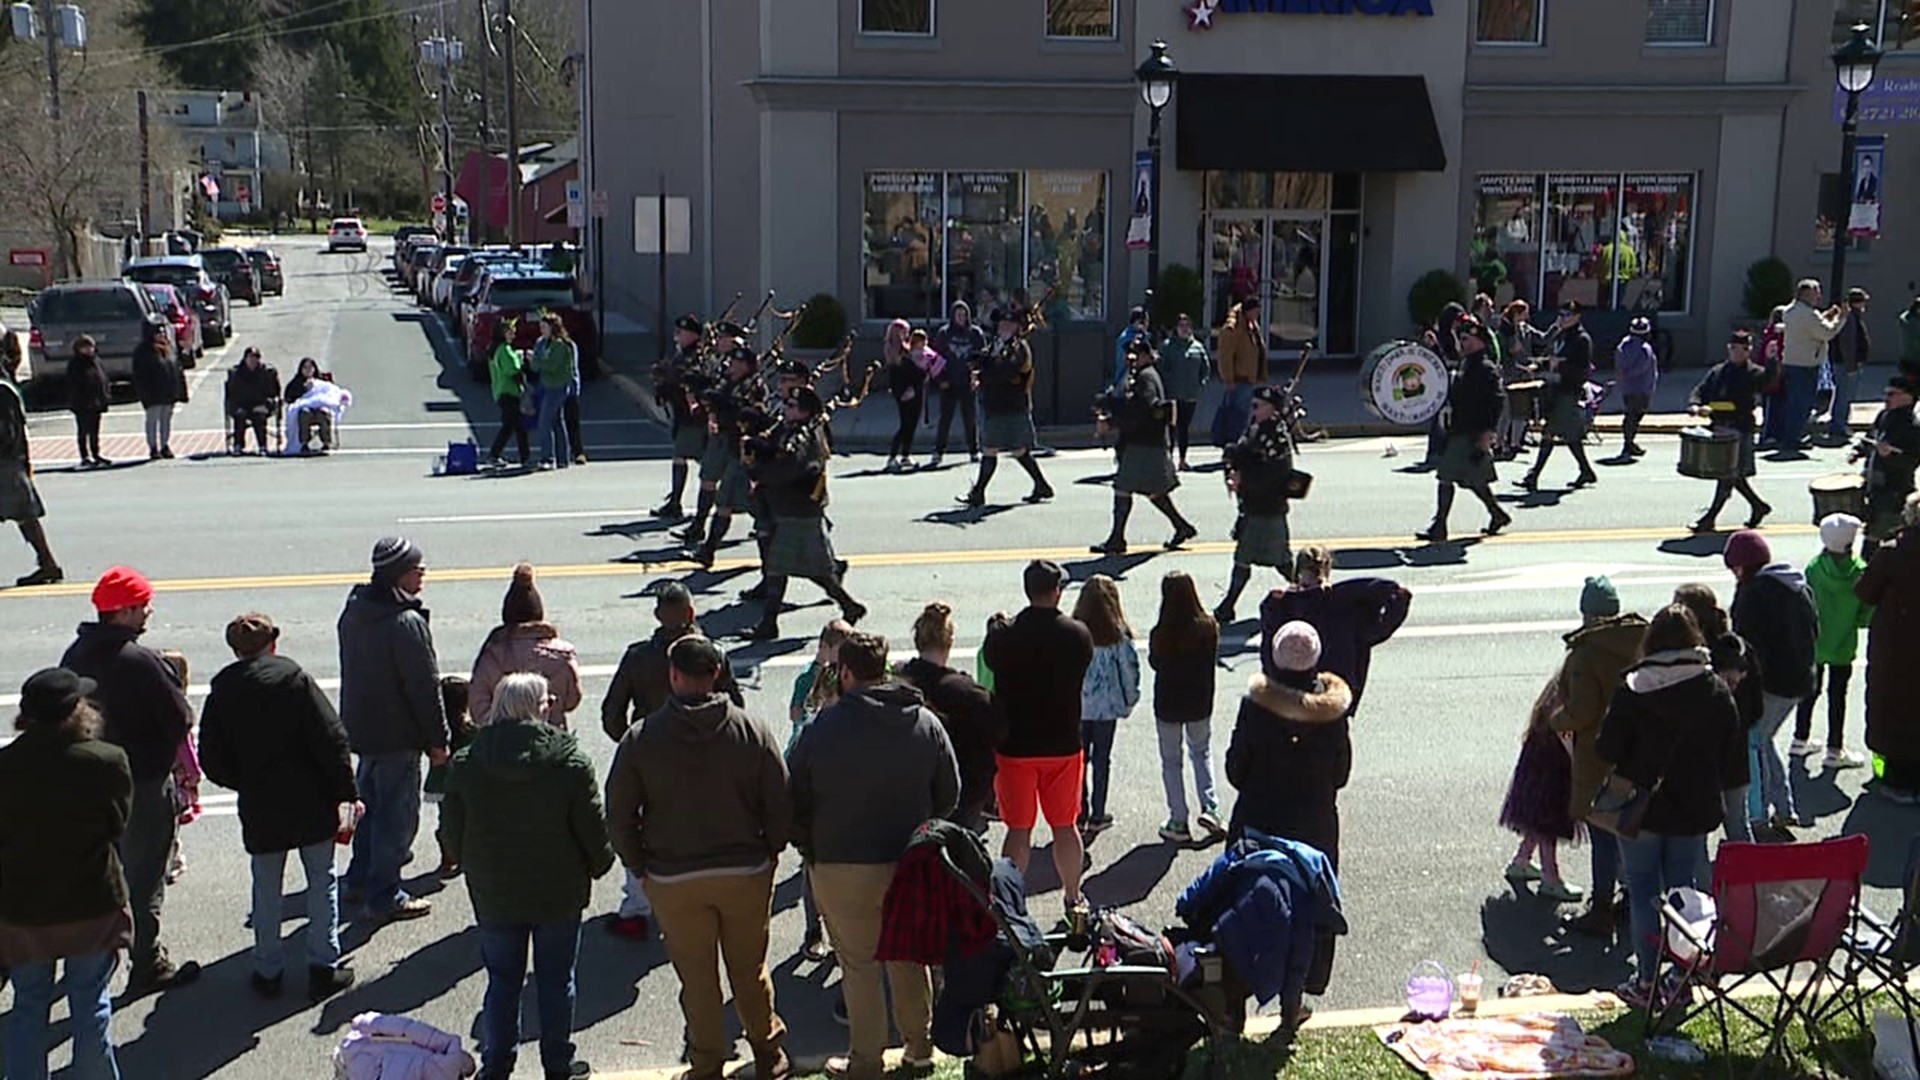 Folks in the Poconos came together for the finale of the St. Patrick's Parade season on Sunday afternoon.